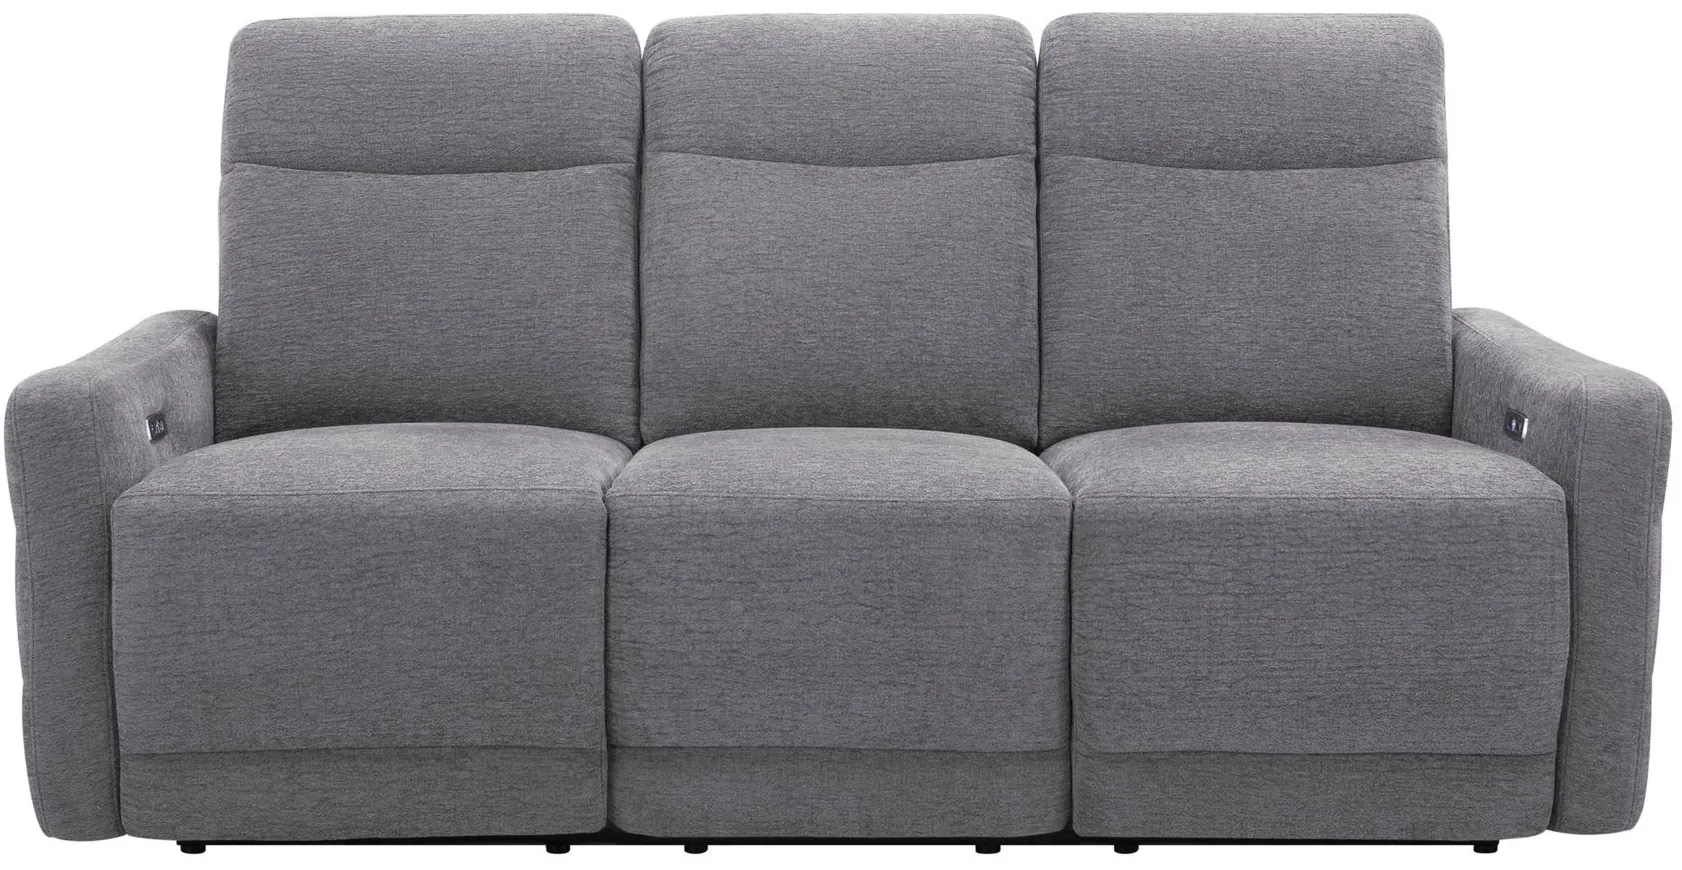 Yardley Chenille Power Sofa with Power Headrest and Lay Flat in Dove by Bellanest